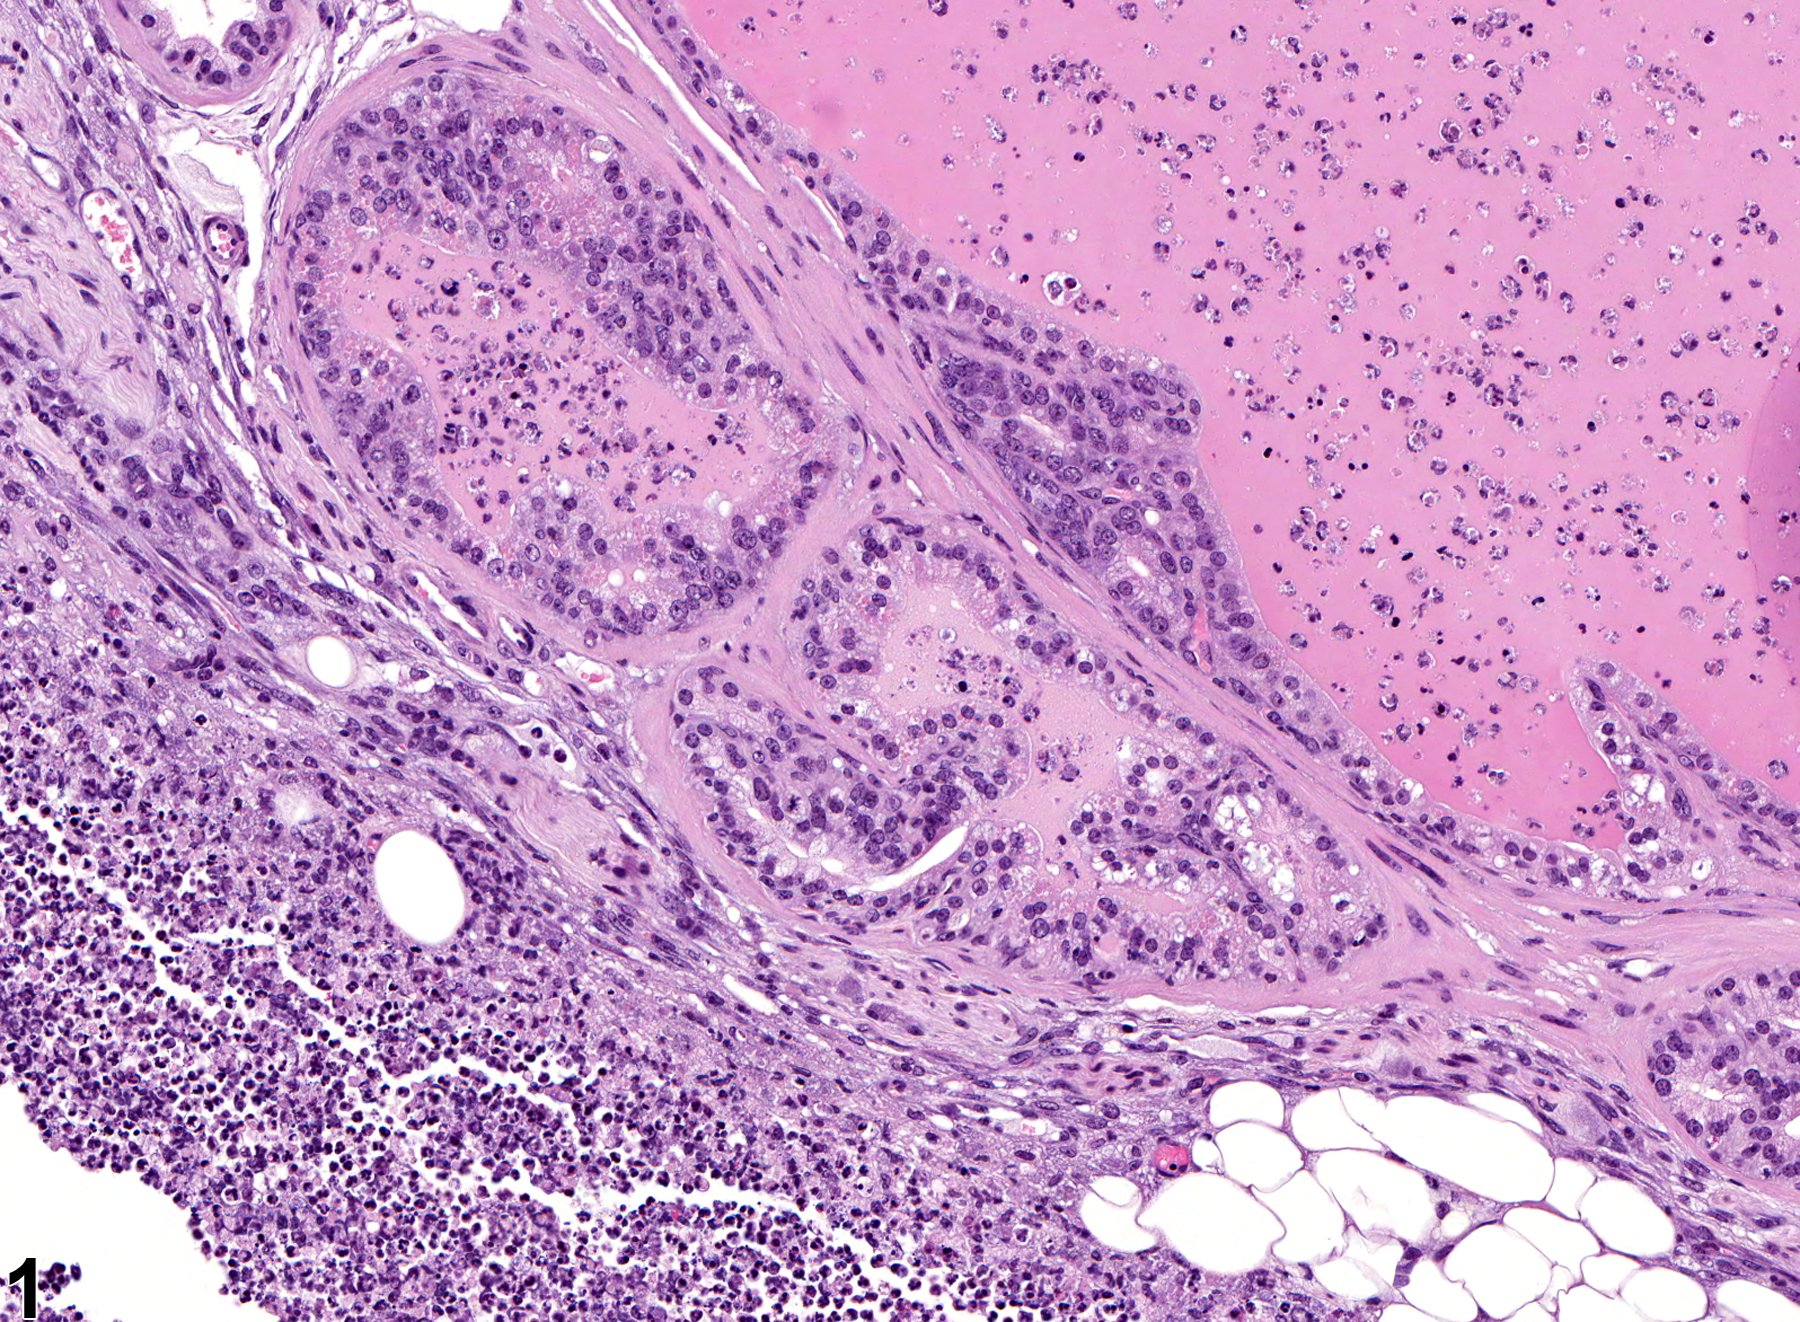 Image of inflammation in the seminal vesicle from a male B6C3F1 mouse in an chronic study